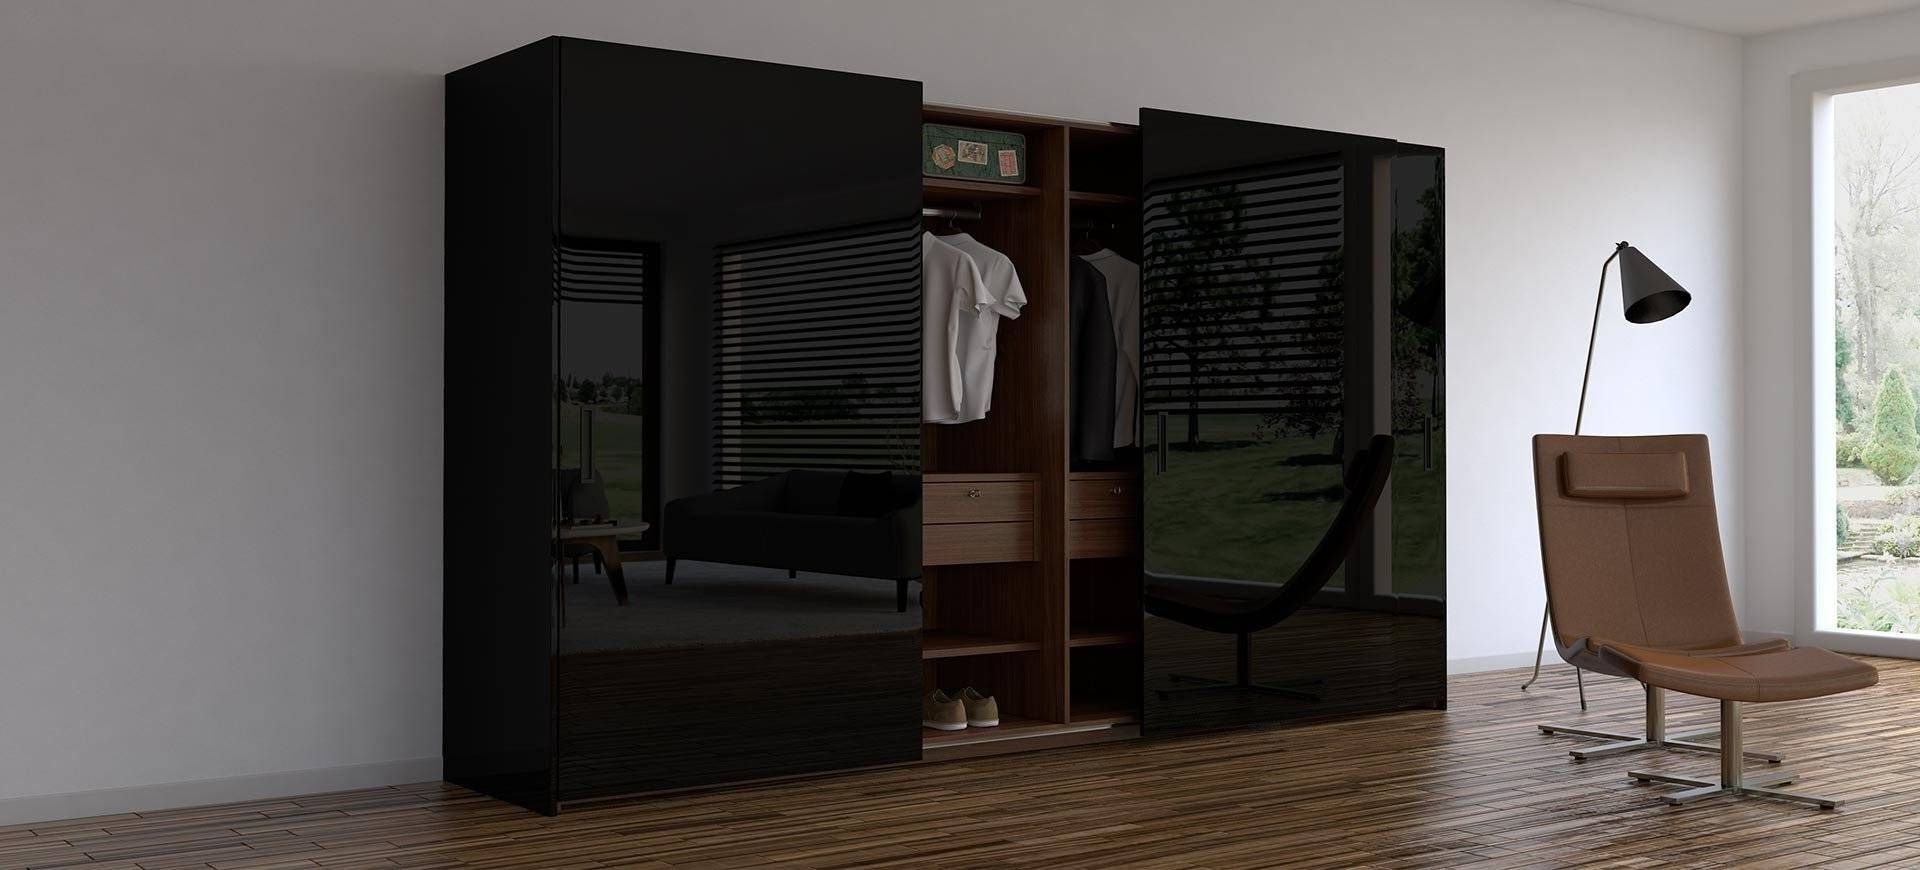 High Gloss Black Wardrobes Intended For Widely Used Elegant Gloss Black Wardrobes – Buildsimplehome (View 3 of 15)